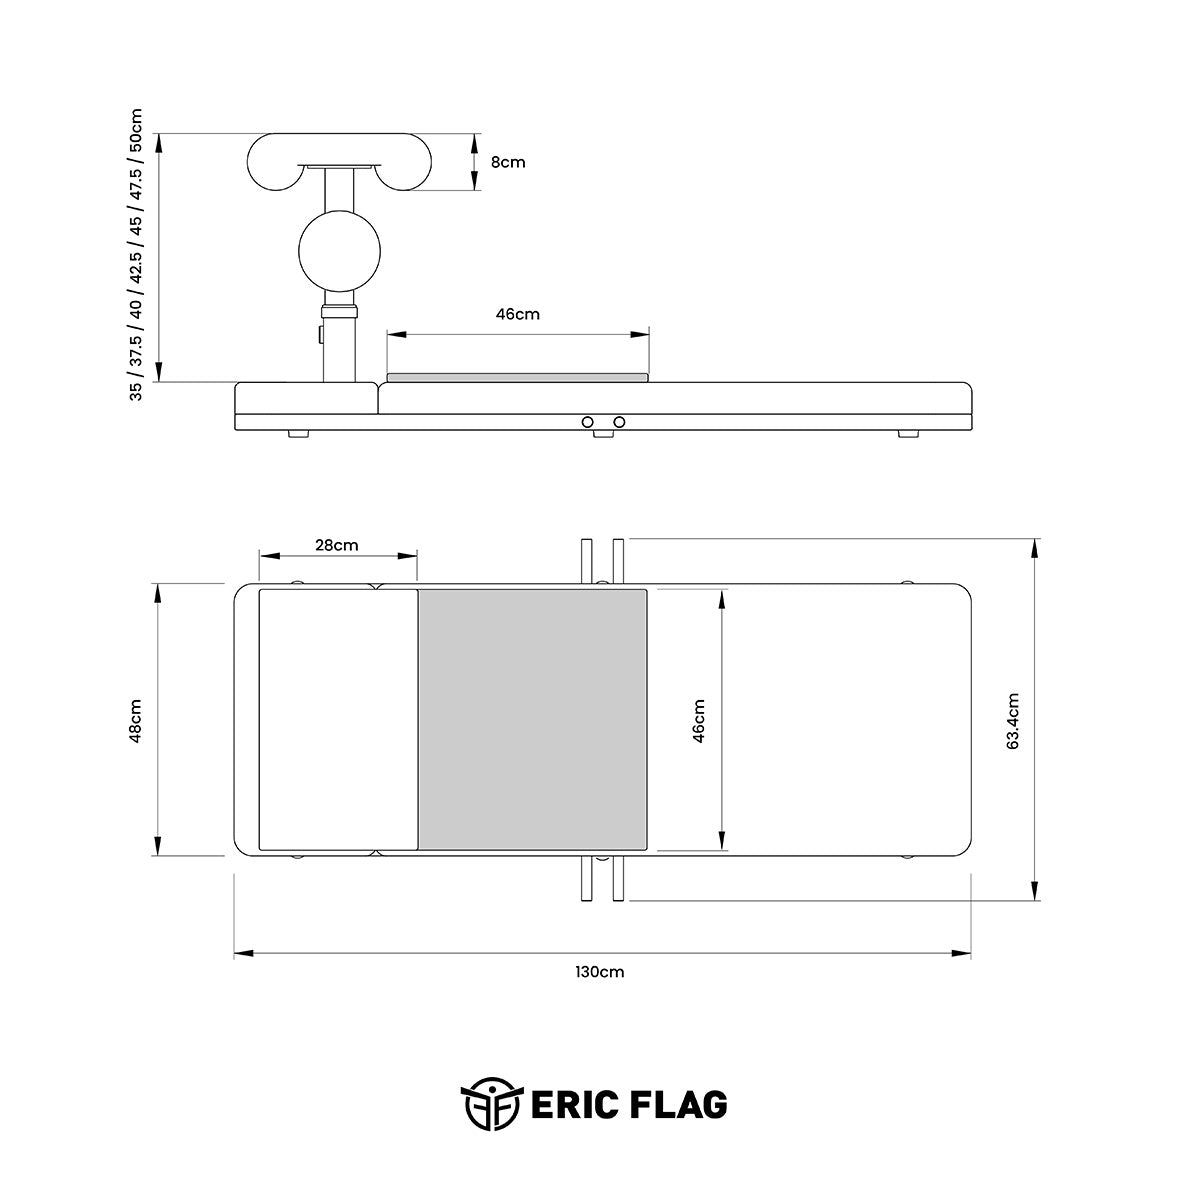 dimensions weight bench eric flag